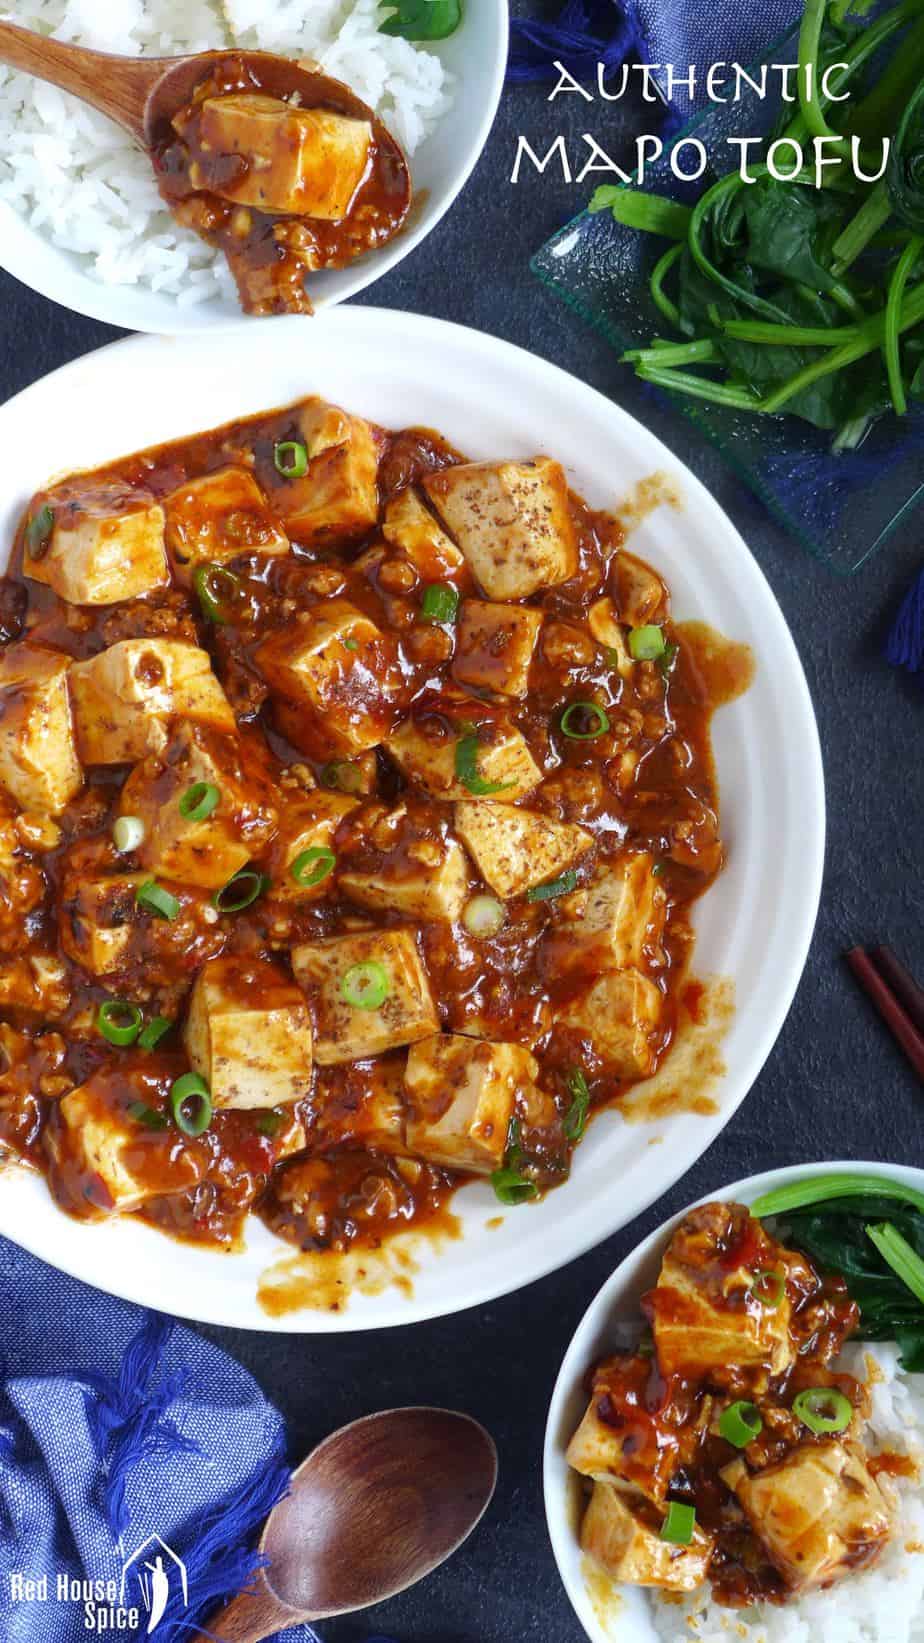 Tender tofu cooked in an aromatic and spicy sauce, accompanied by minced meat, Mapo tofu is one of the most popular ways to prepare tofu in China.